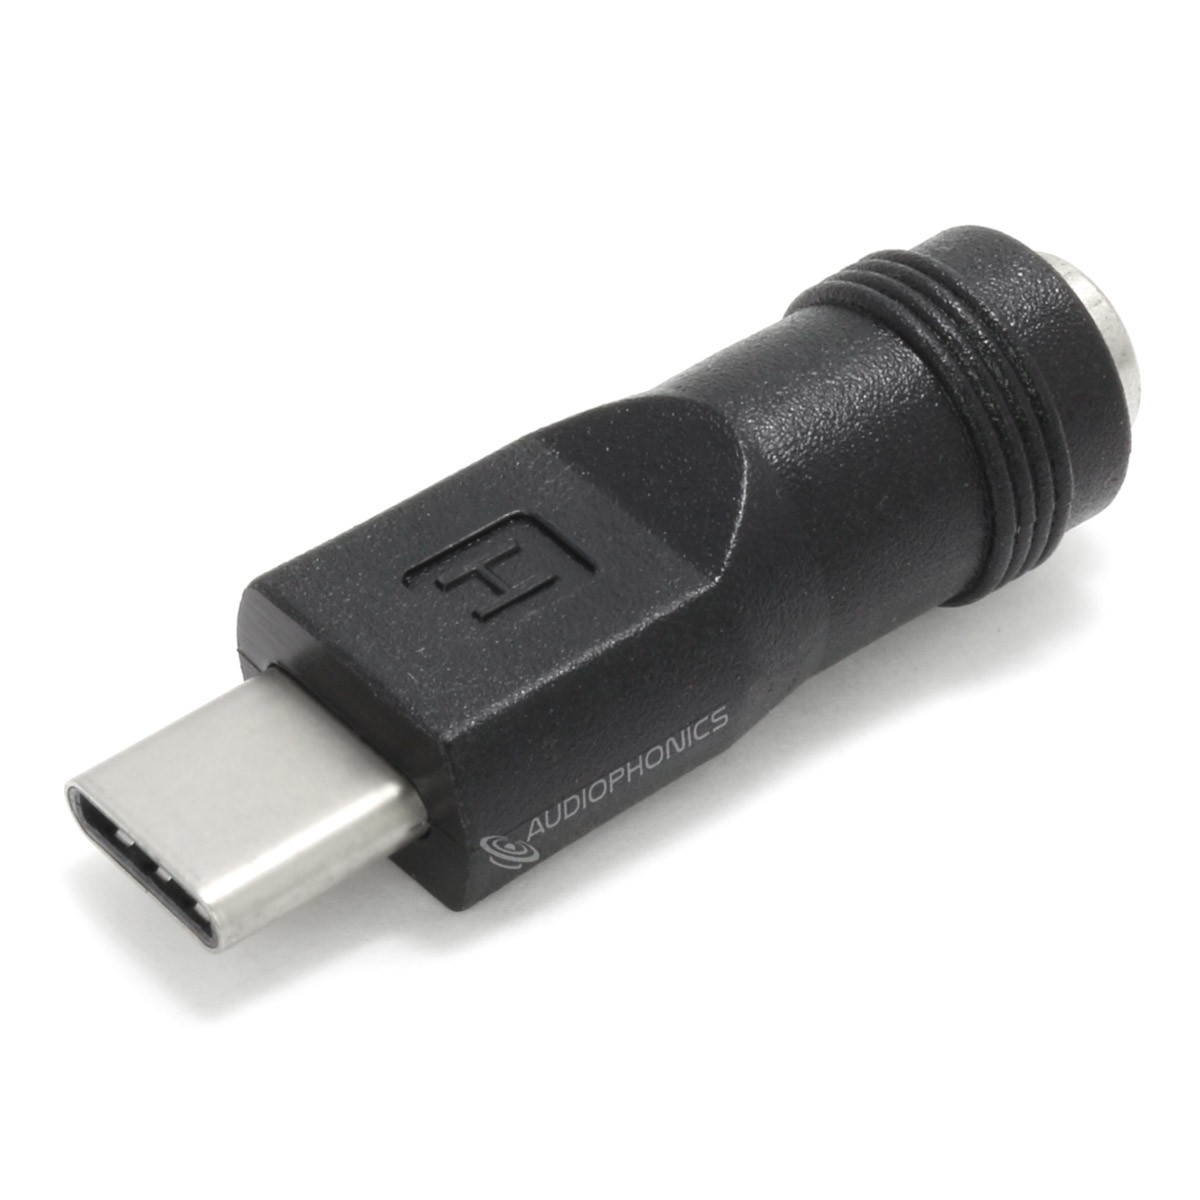 Female Jack DC 5.5 / 2.5mm to Male USB-C Adapter